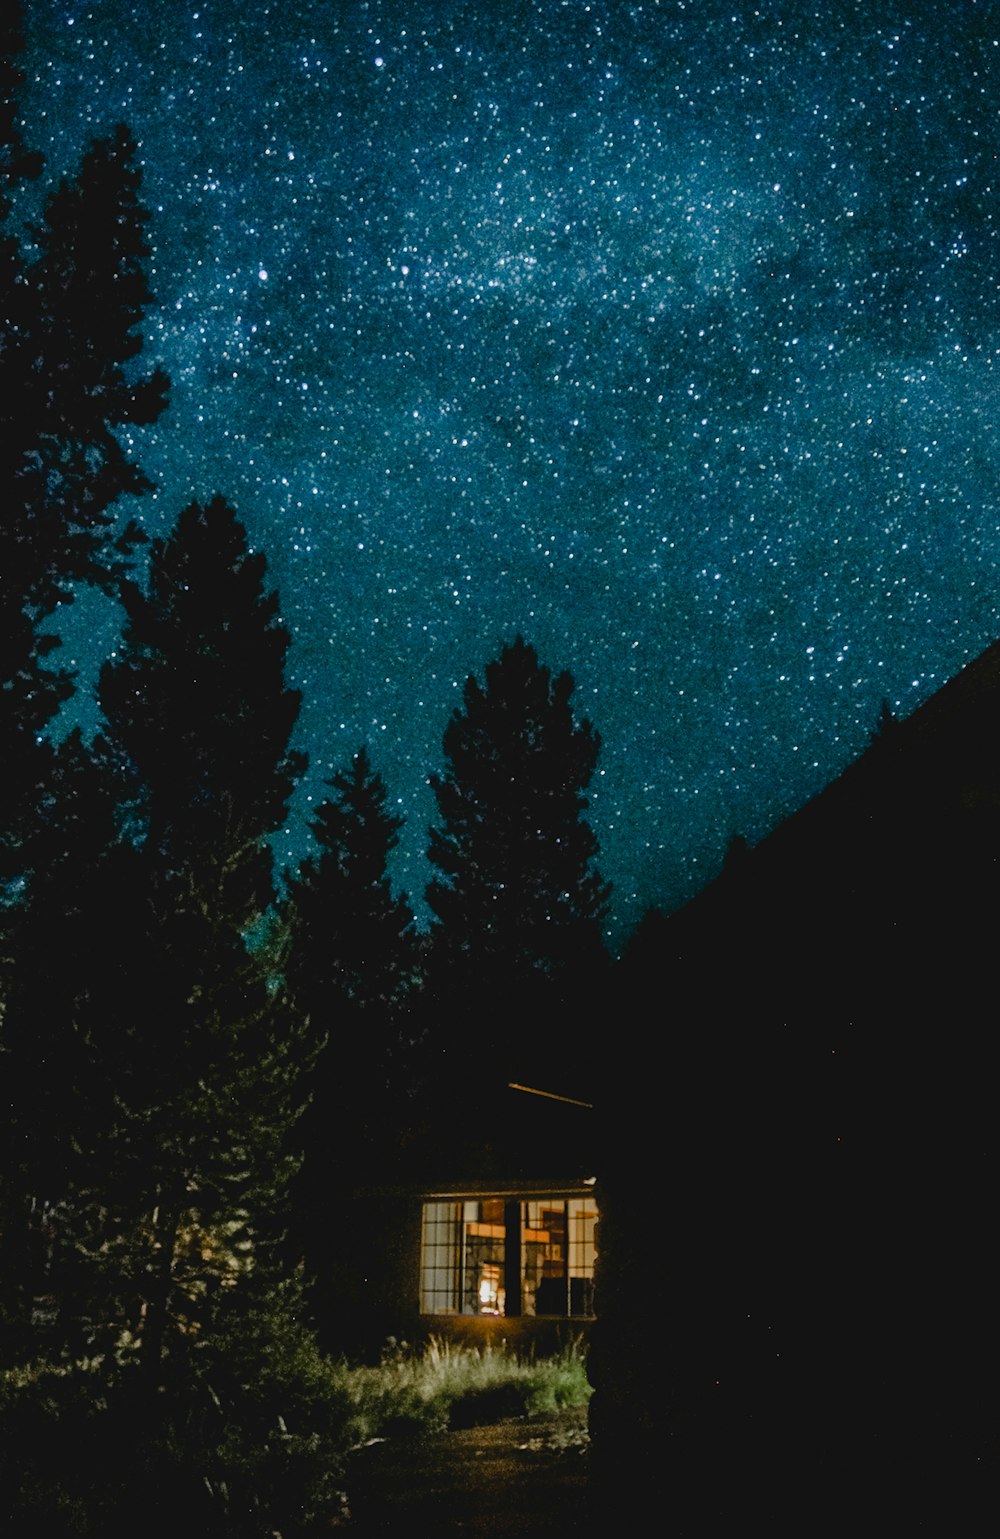 brown wooden house near trees under starry night